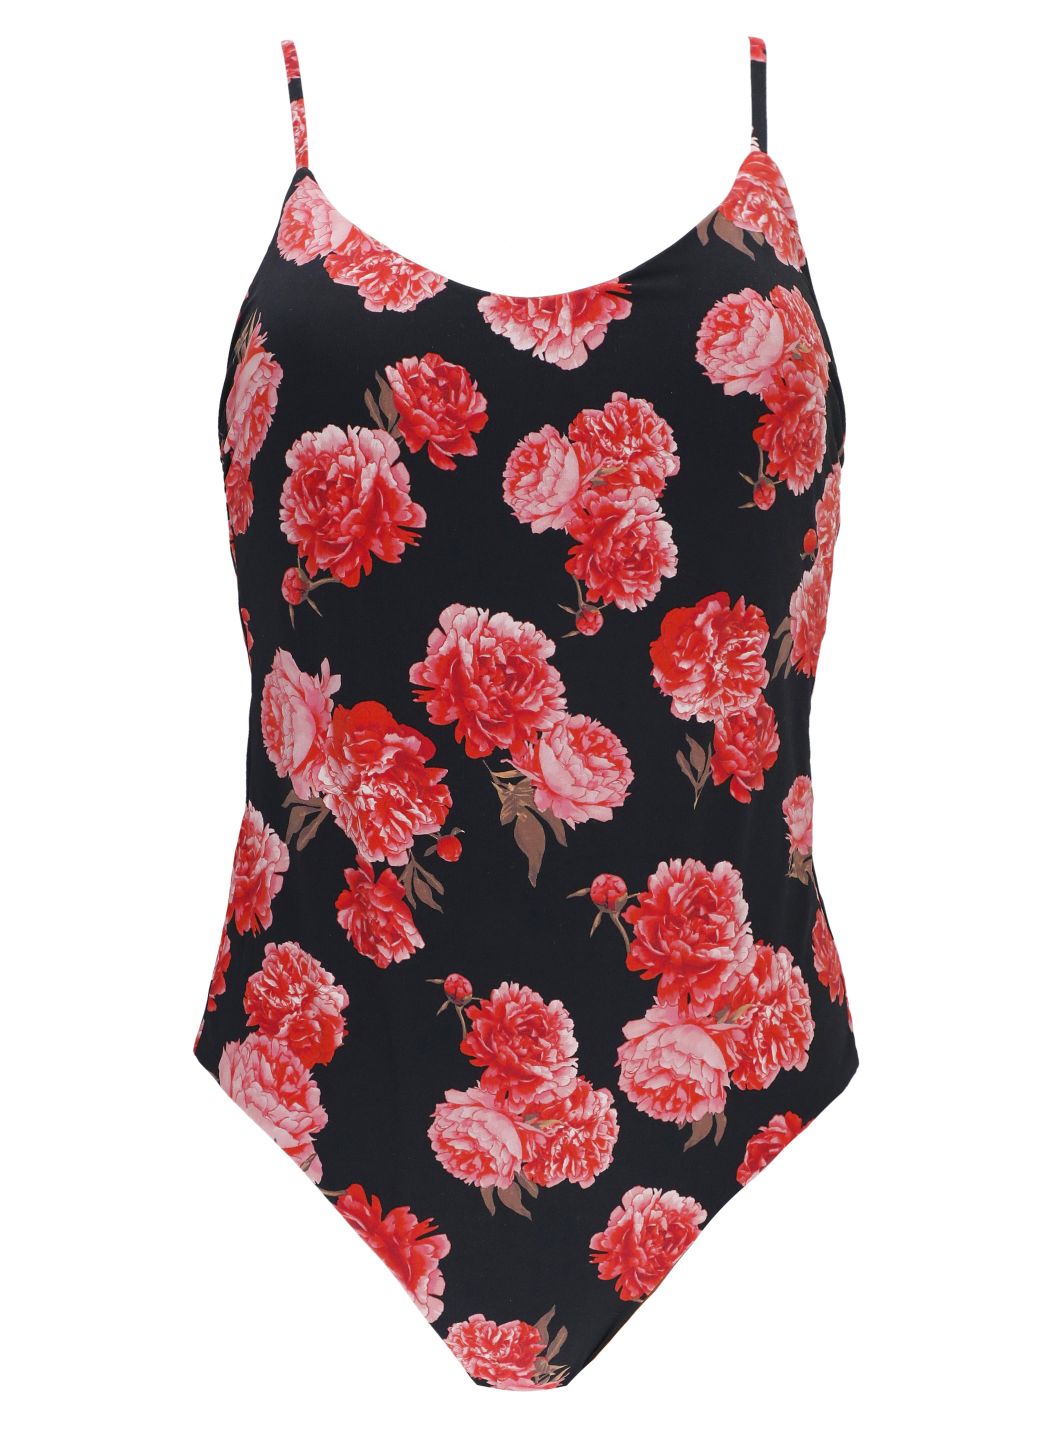 Monokini with floral pattern